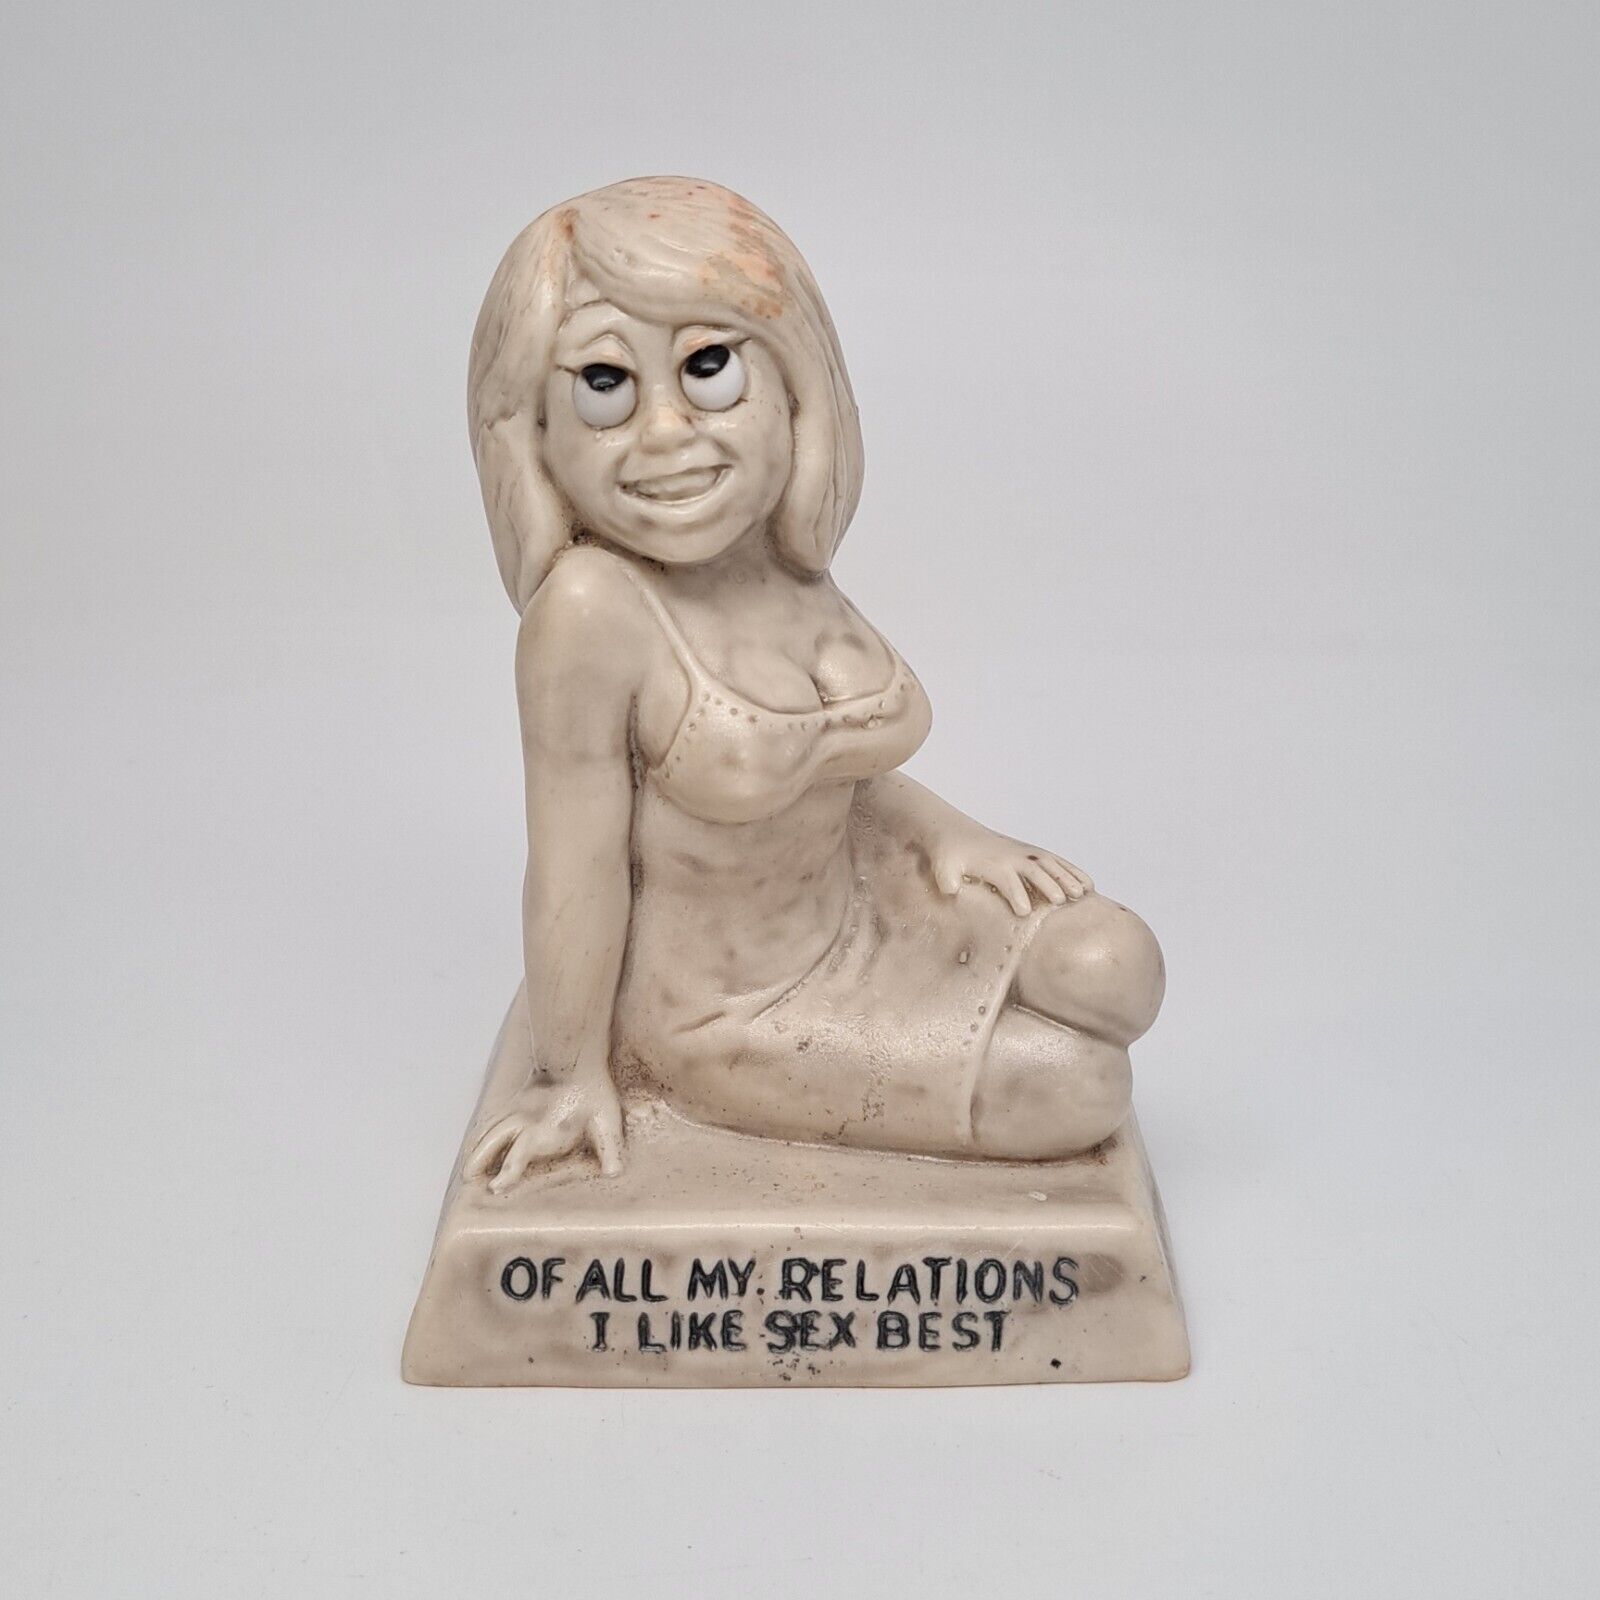 Vtg 1968 R&W Berrie OF ALL MY RELATIONS I LIKE SEX THE BEST Figurine Rare - READ